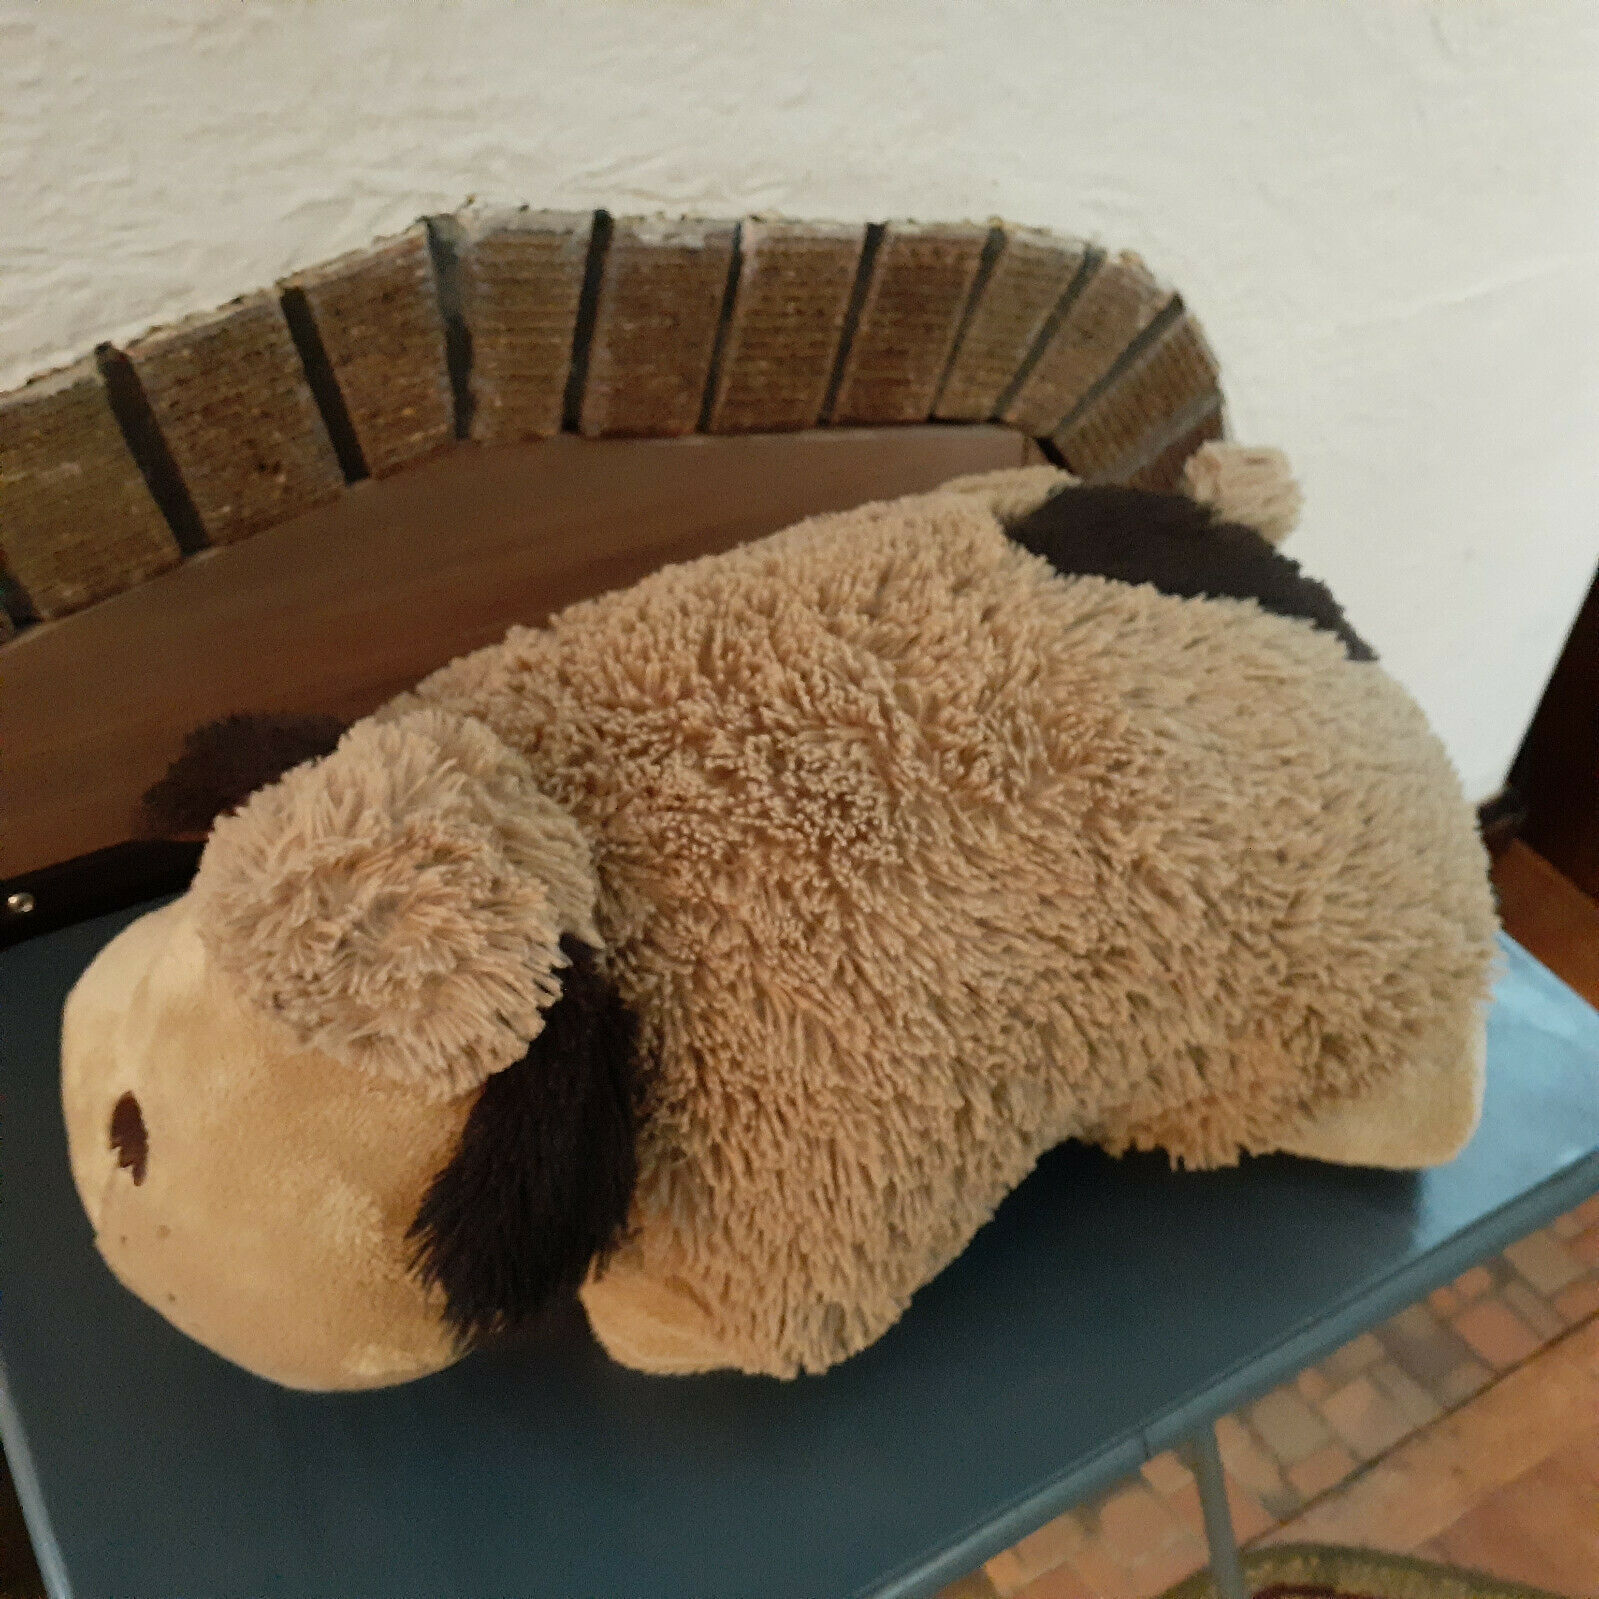 Primary image for Pillow Pets Stuffed Dog Unfolding Into A Pillow